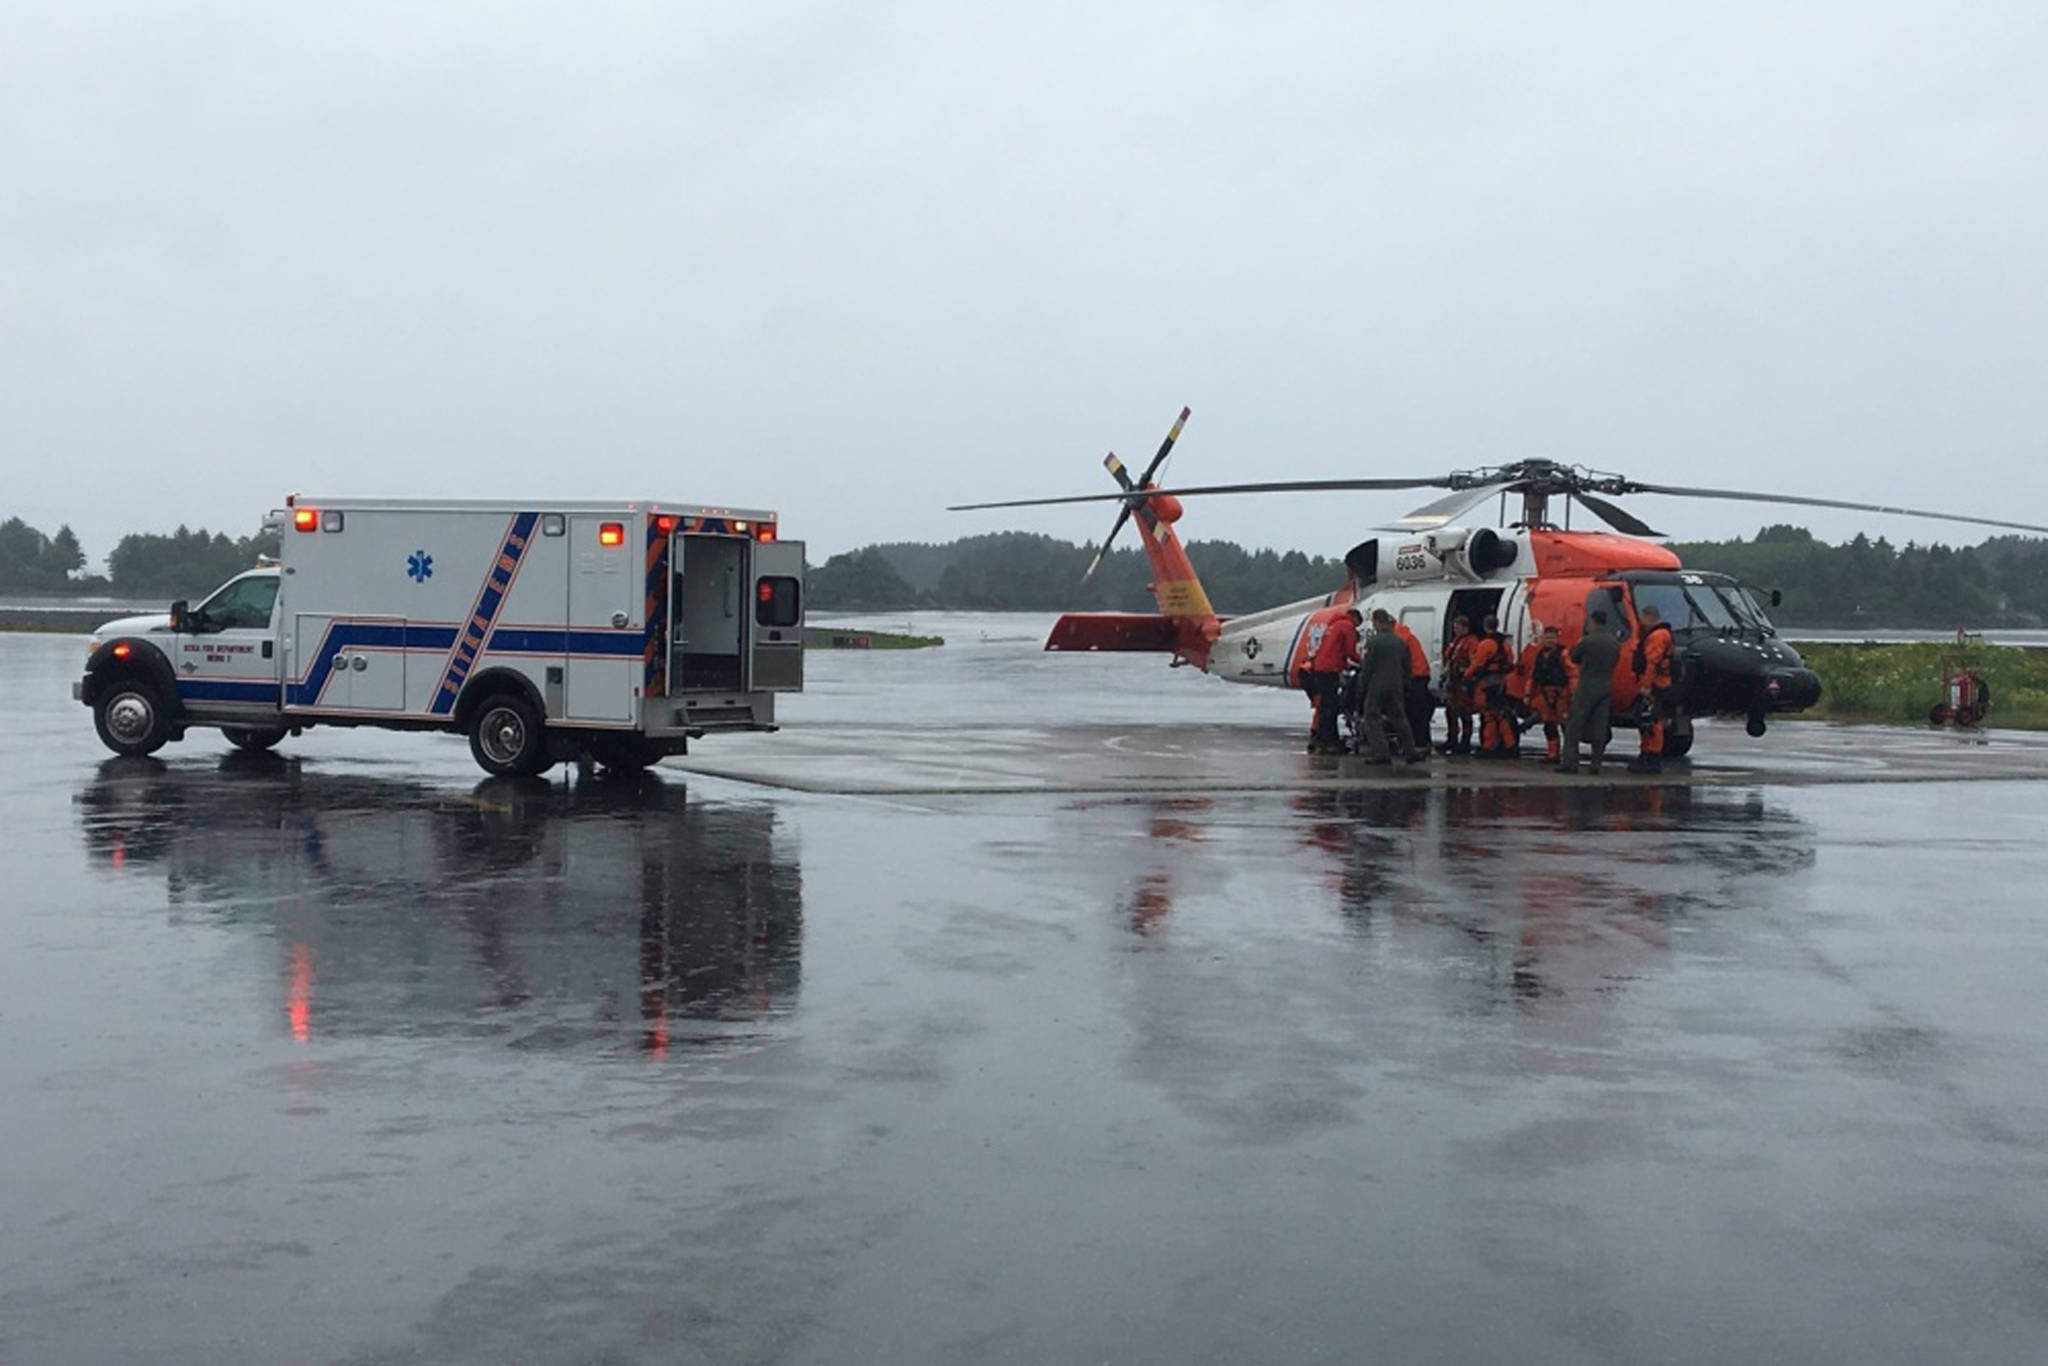 A Coast Guard Air Station Sitka MH-60 Jayhawk helicopter crew transfers an injured hiker to emergency medical services for further care in Sitka, Alaska, June 15, 2019. The man was reported to have fallen 100 feet while hiking in the Sisters Mountains in Sitka with two other people and he required rescue. (Courtesy photo | U.S. Coast Guard)